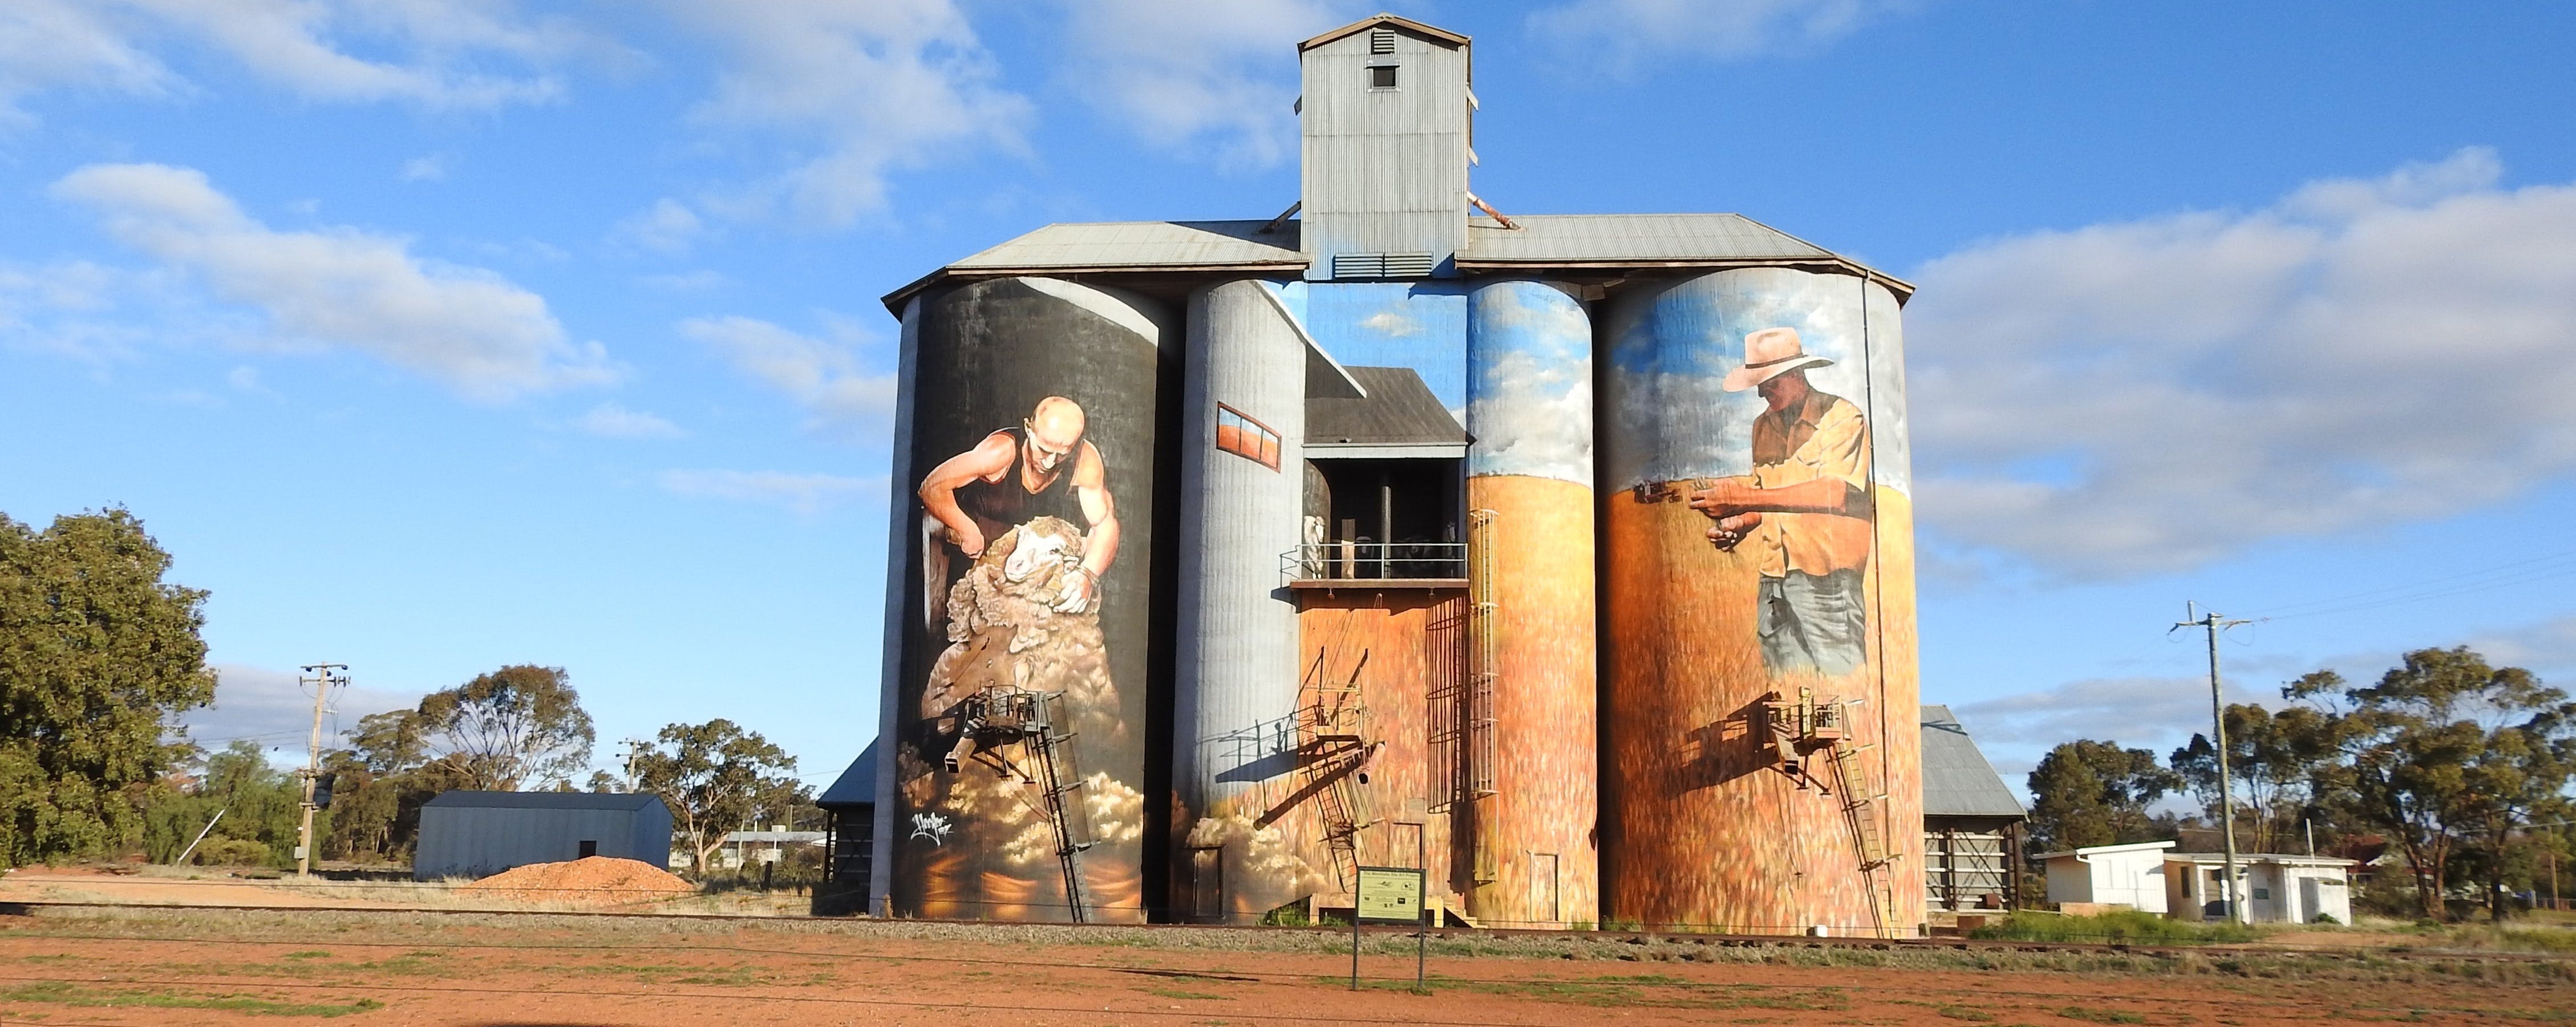 Riverina Outdoor Art Trail - New South Wales Tourism 